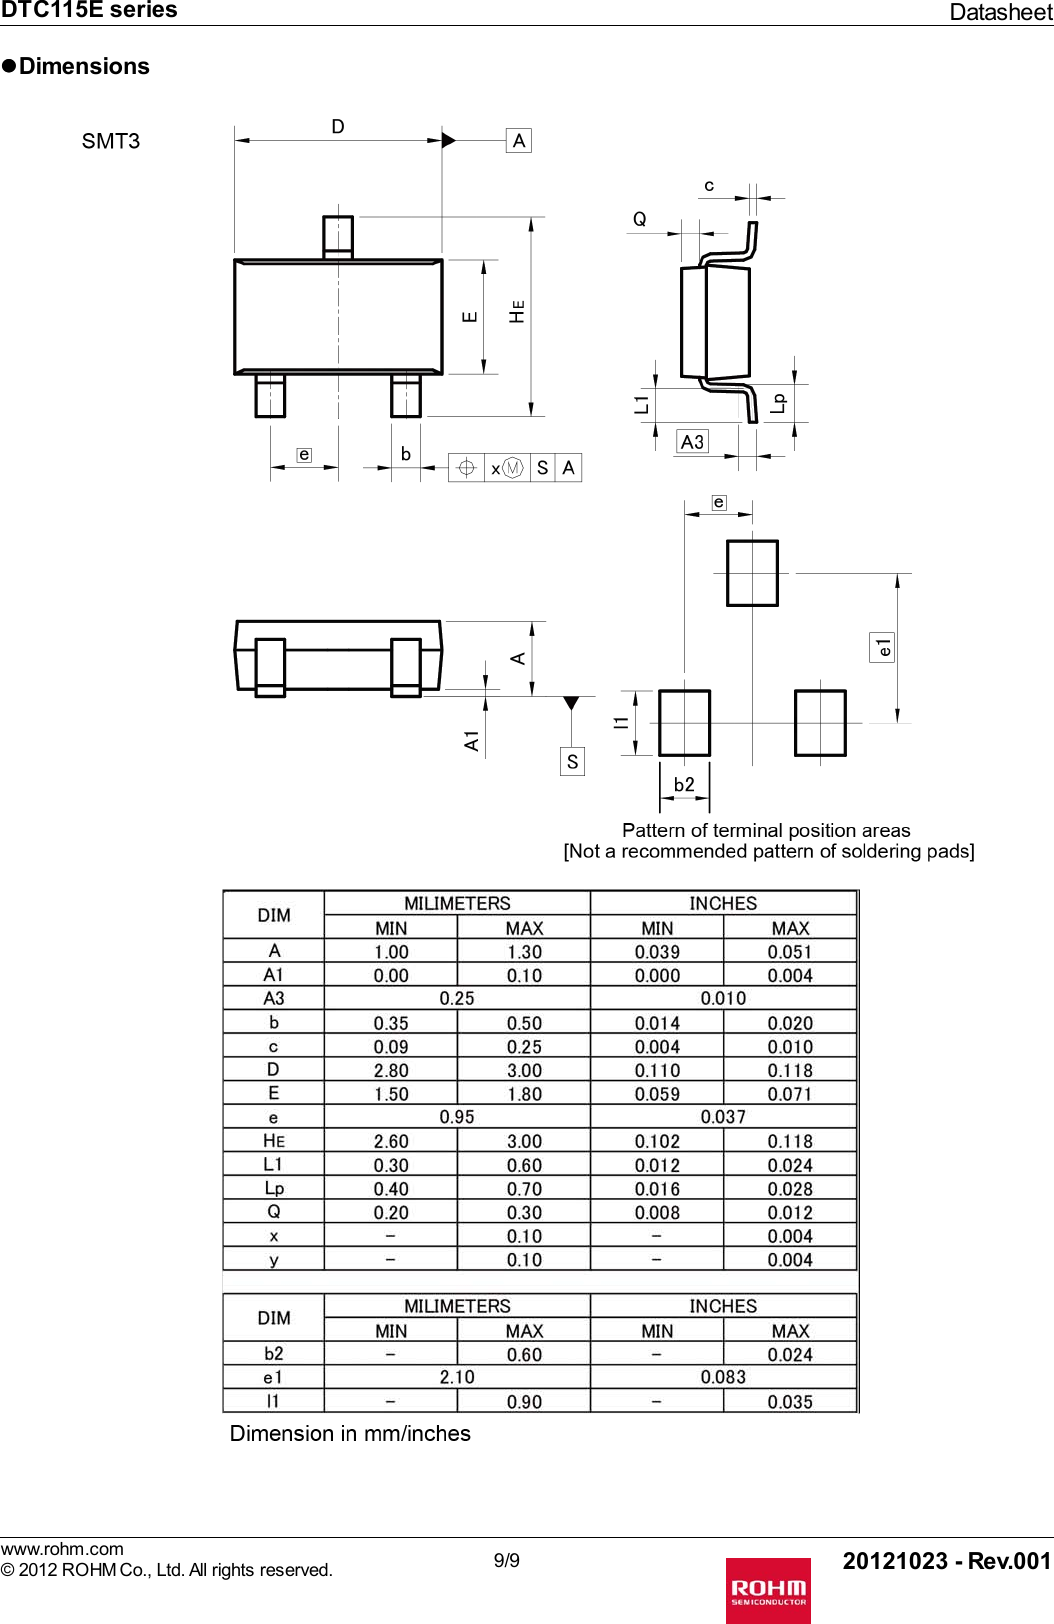 Page 9 of 11 - DTC115E Series - Datasheet. Www.s-manuals.com. Rohm